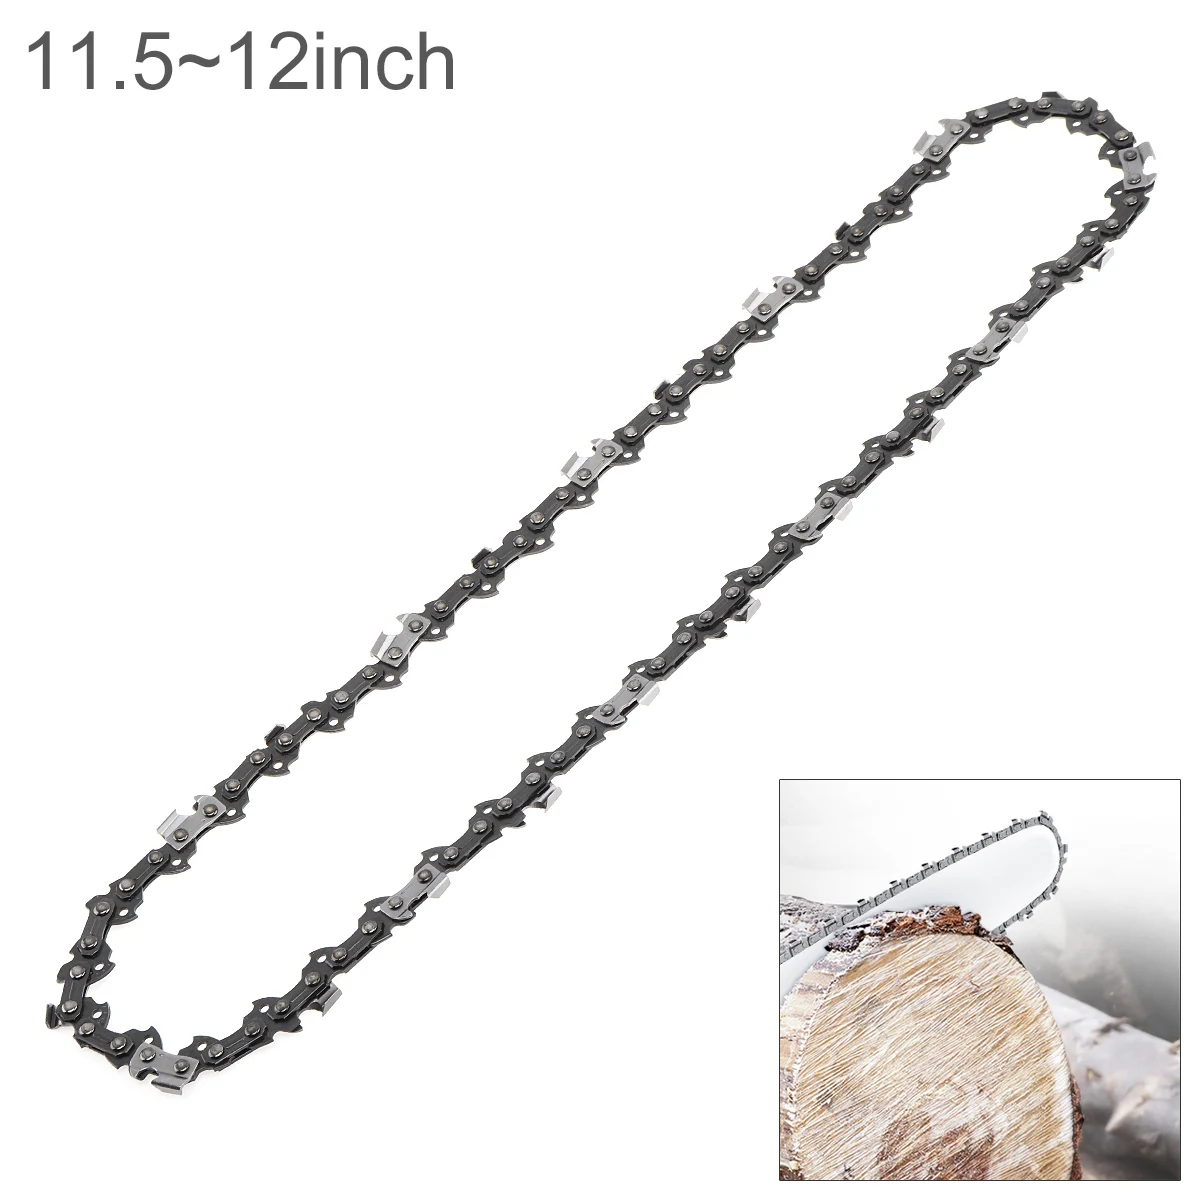 

12Inch Chainsaw Chain 3/8 Pitch Saw Chain 45 Drive Link Electric Chainsaw Parts Chainsaw Blades for Woodworking